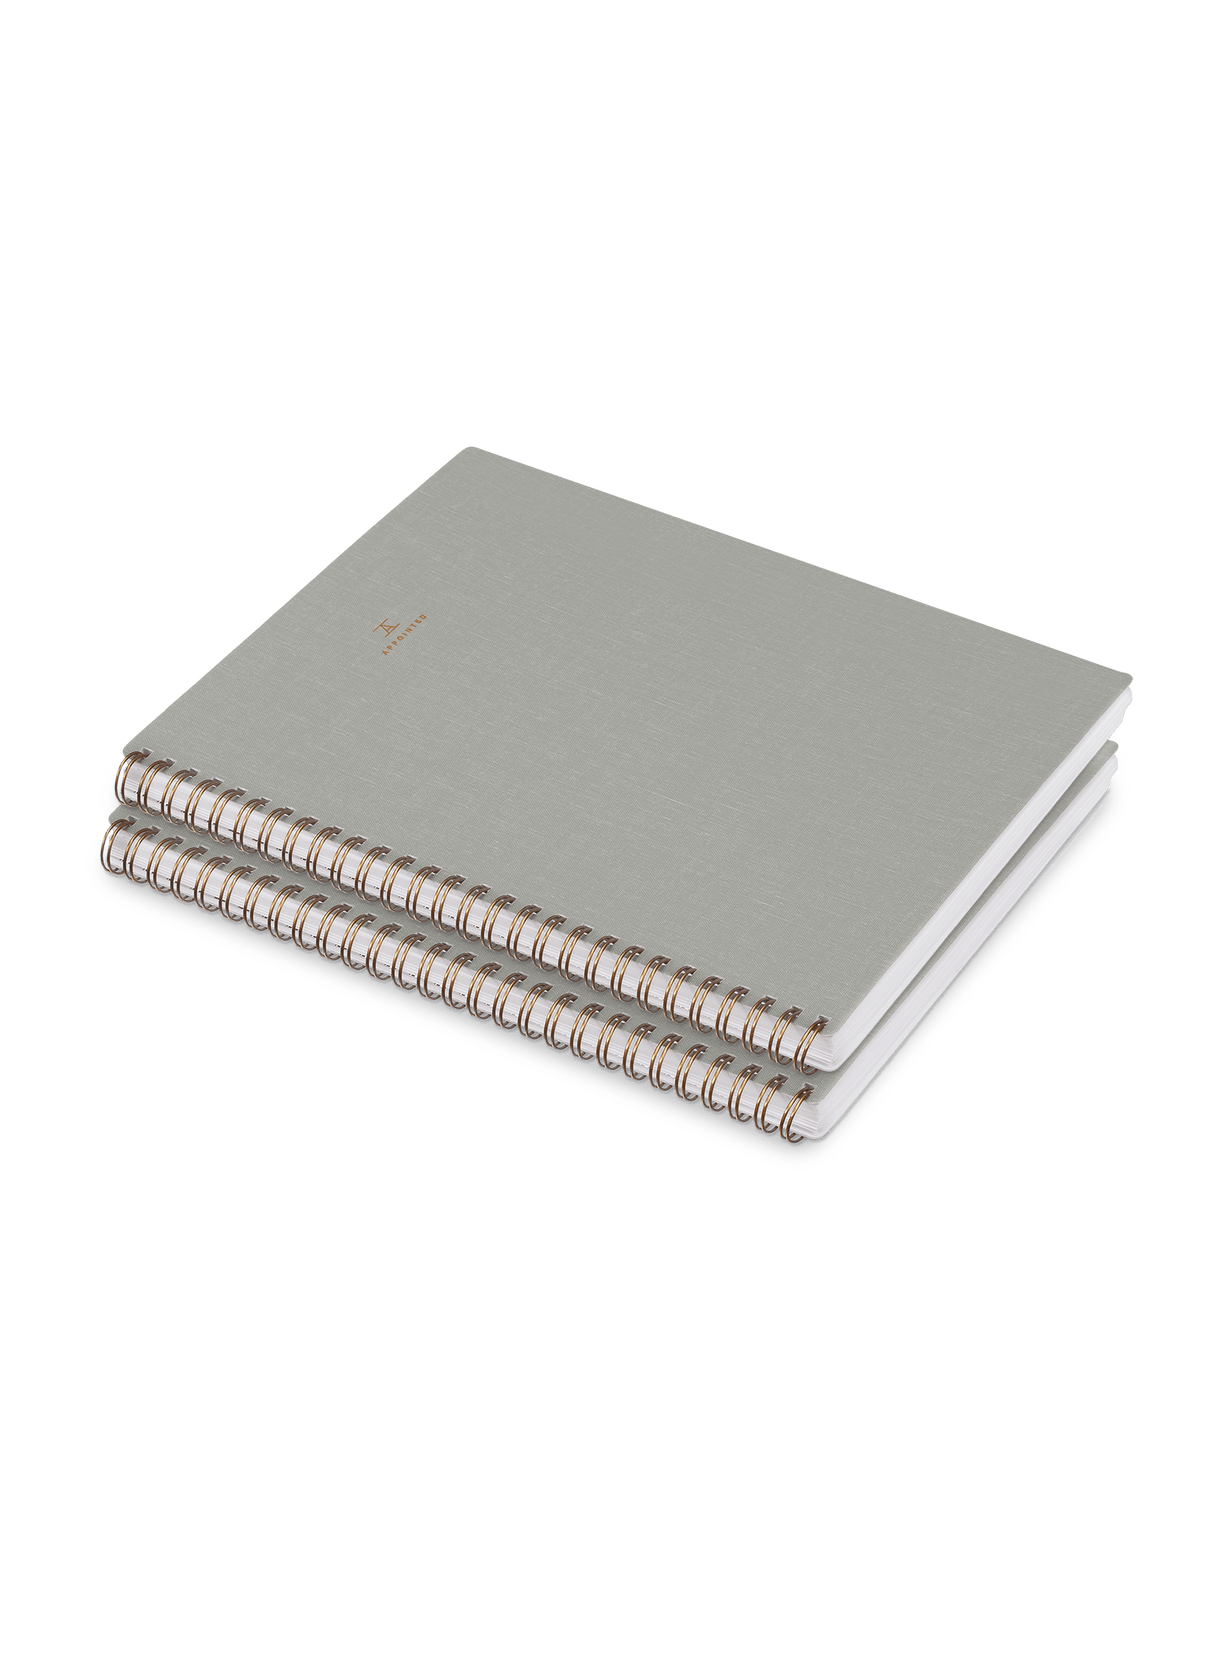 Appointed Notebook in Dove Gray bookcloth with wire-o binding stacked front angled view